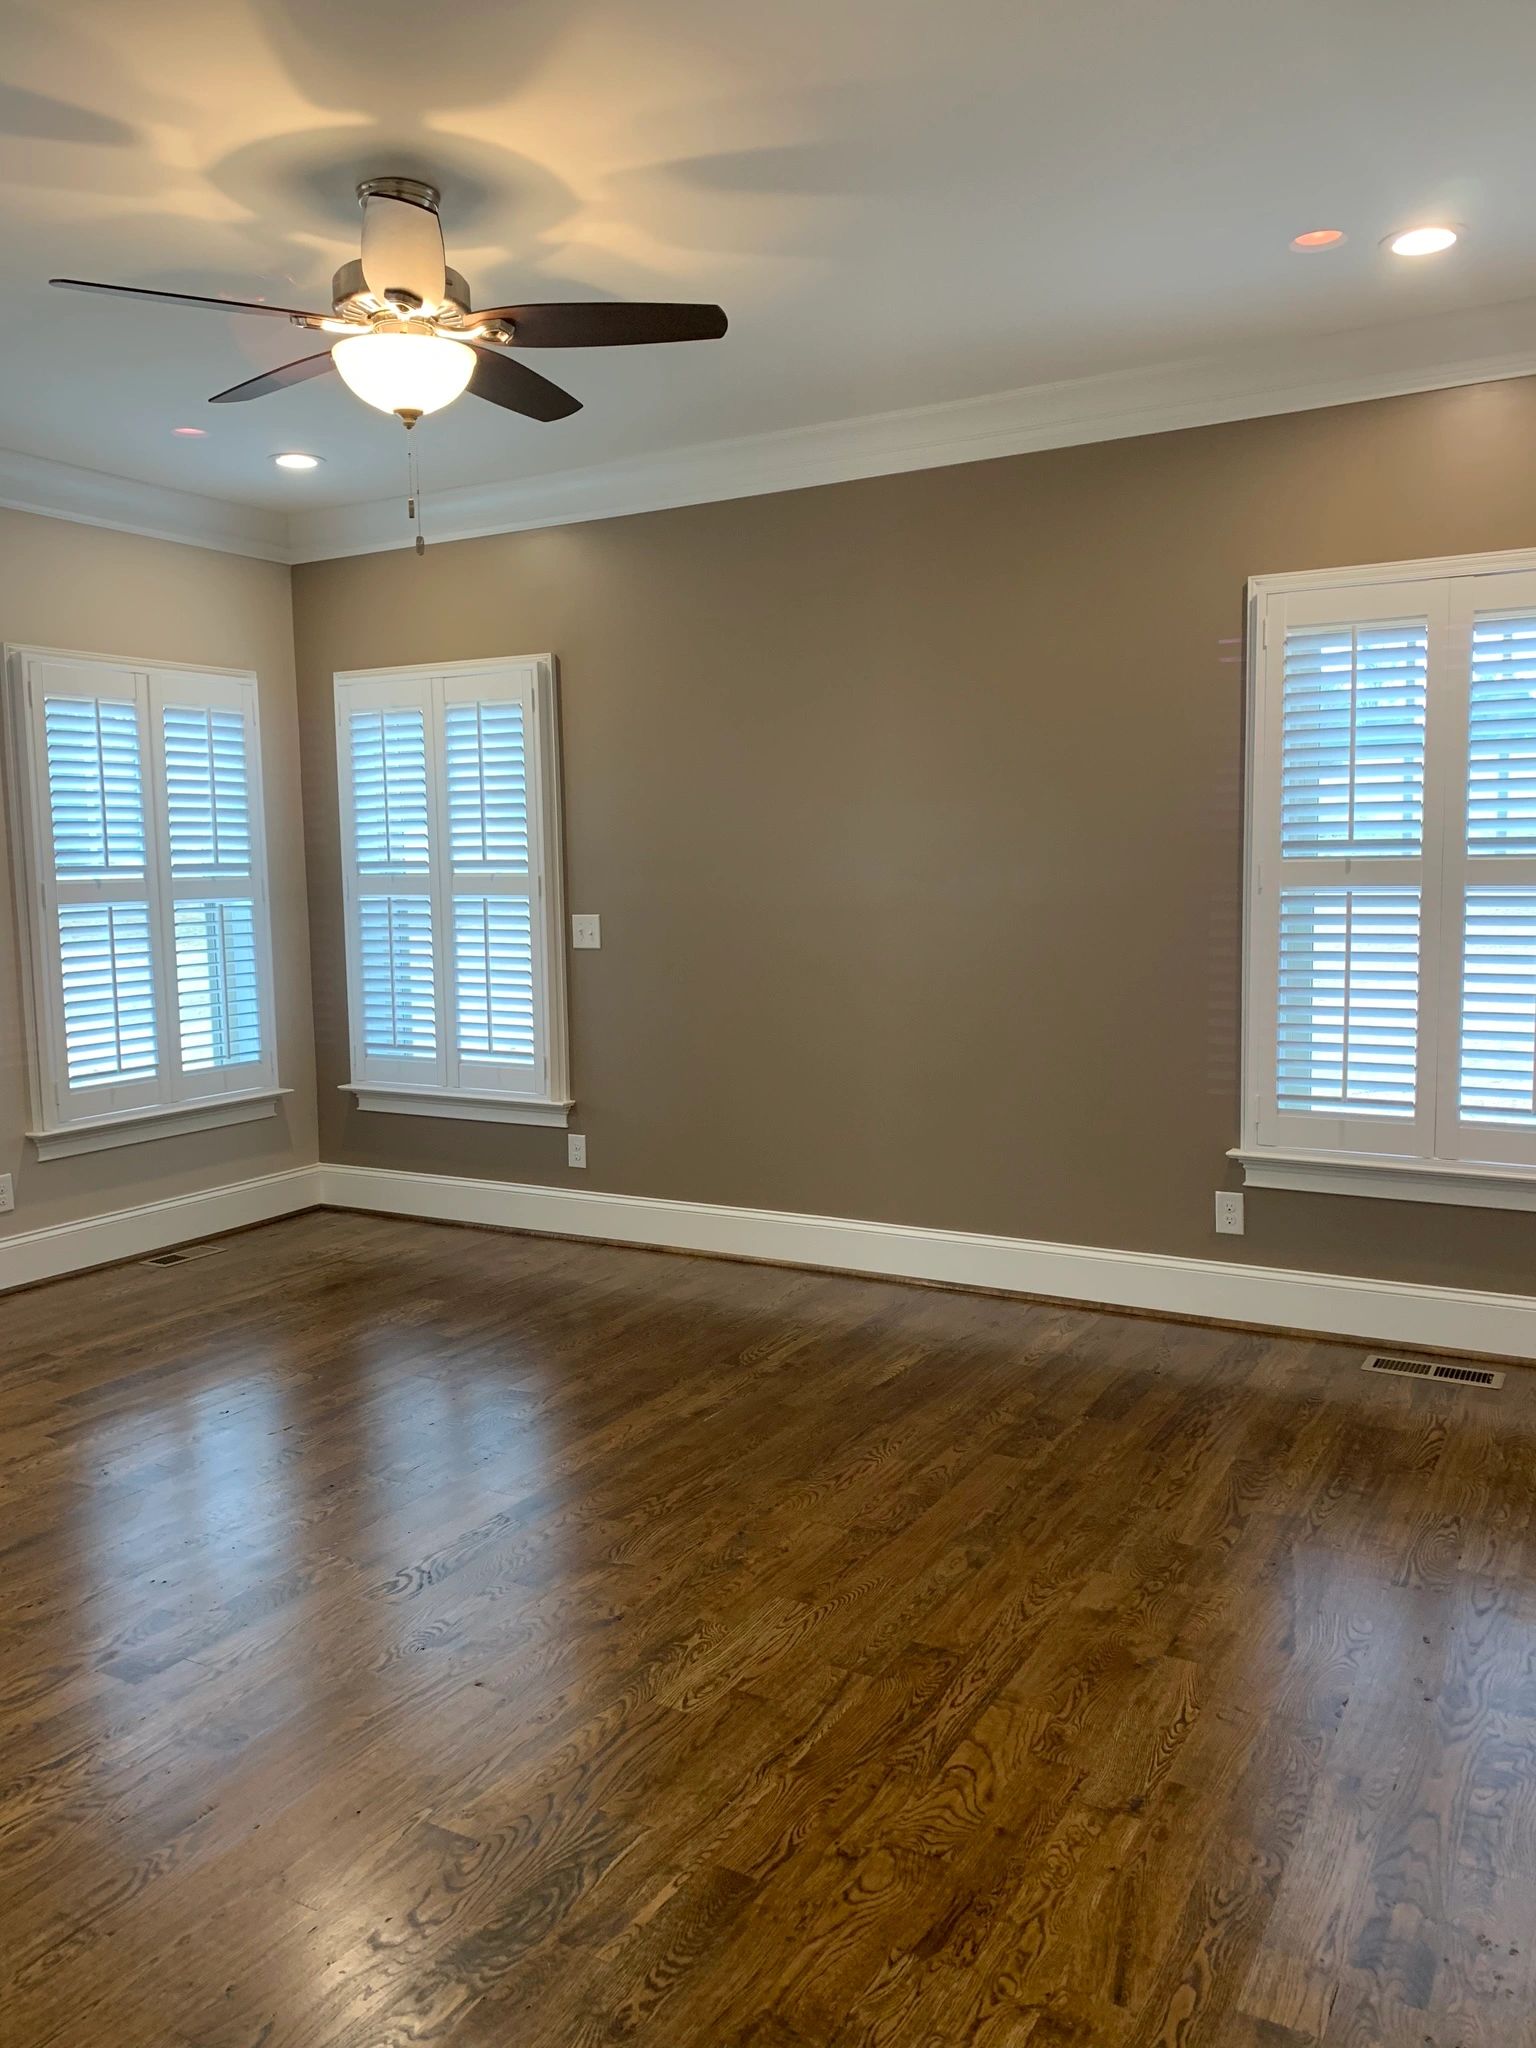 Sand on site hardwood floors. Ceiling fan with light and shutters on windows